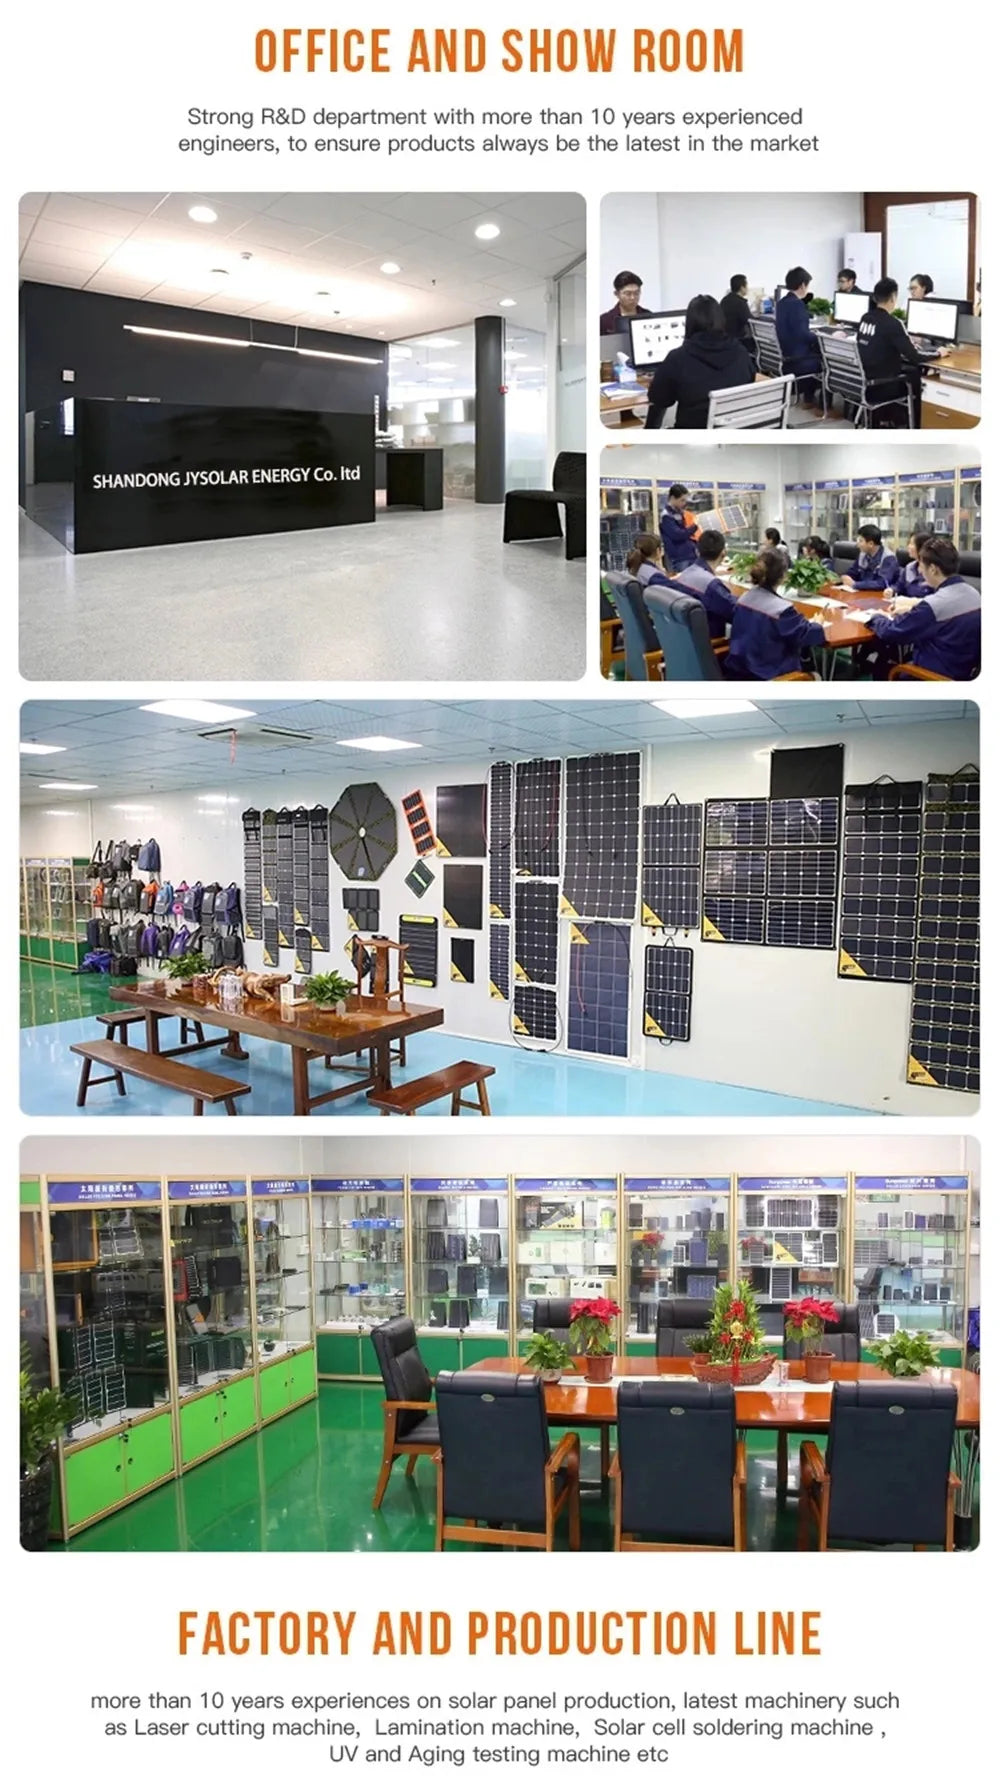 Shandong Jysolar Energy Co., Ltd. - reliable solar panels for RVs and boats with 10+ years experience.